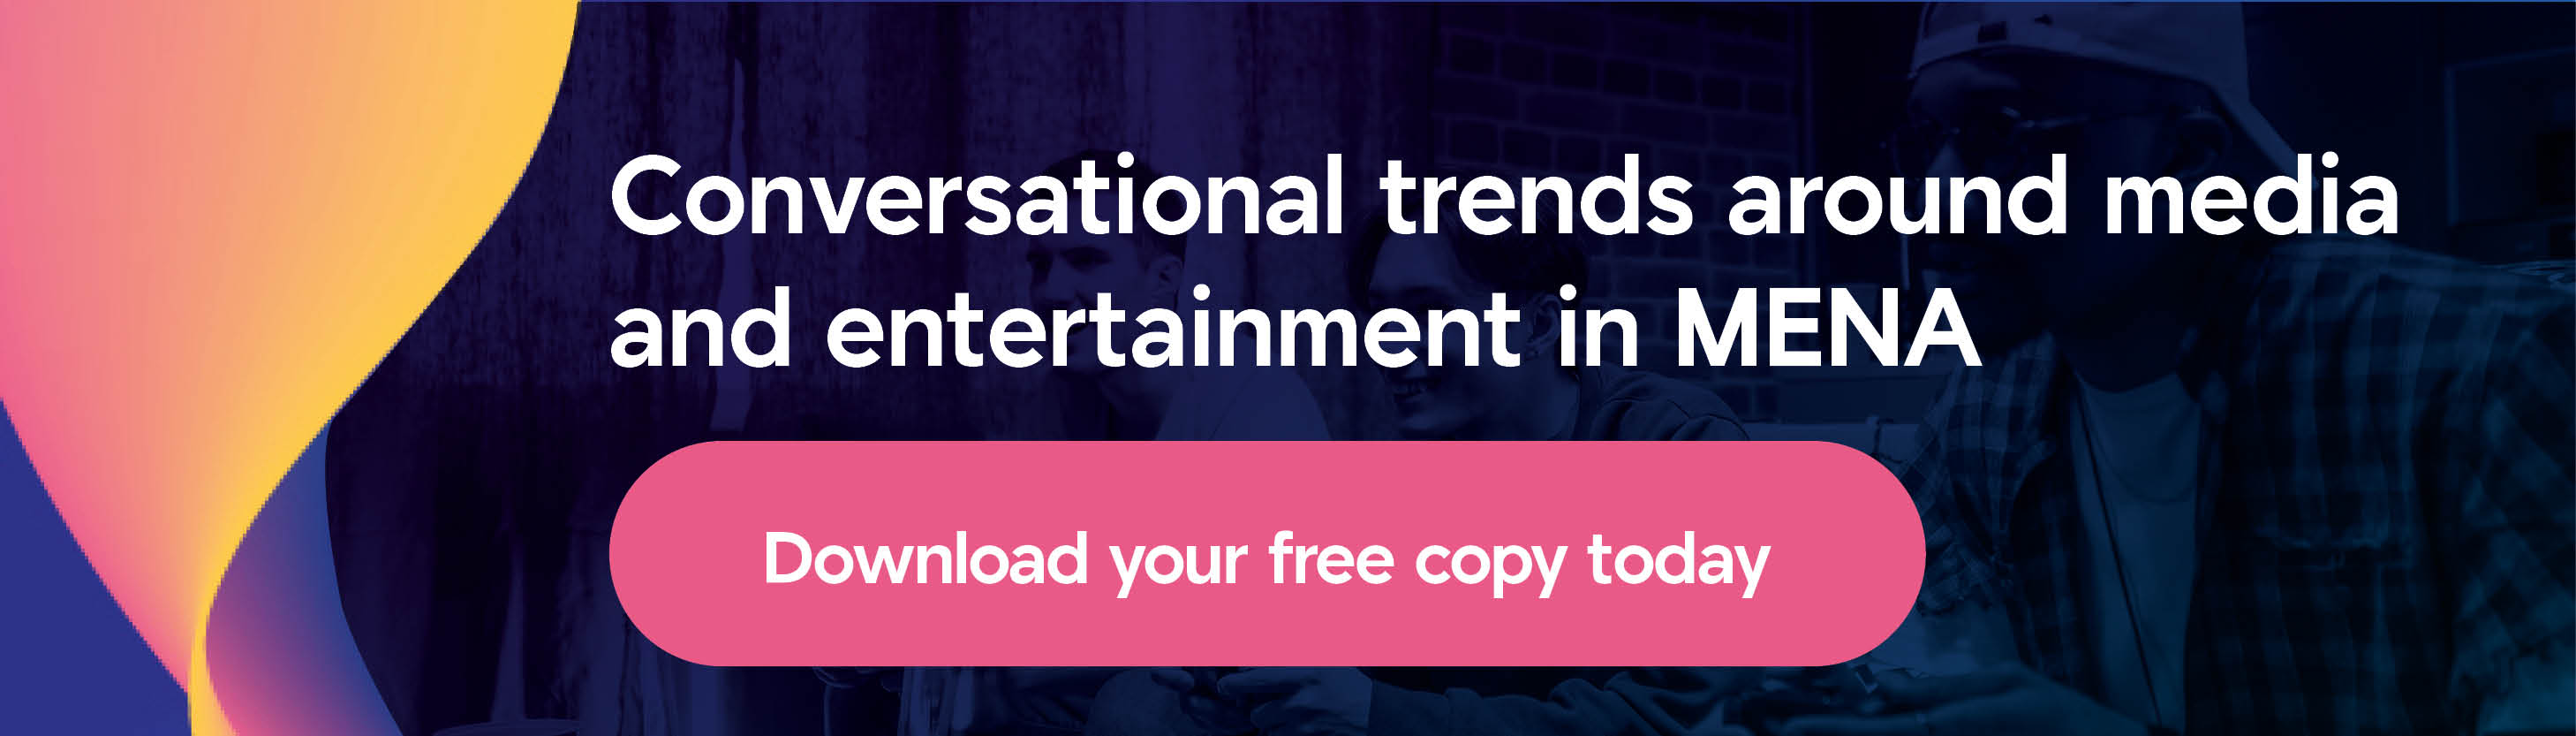 Conversational trends around media and entertainment in MENA